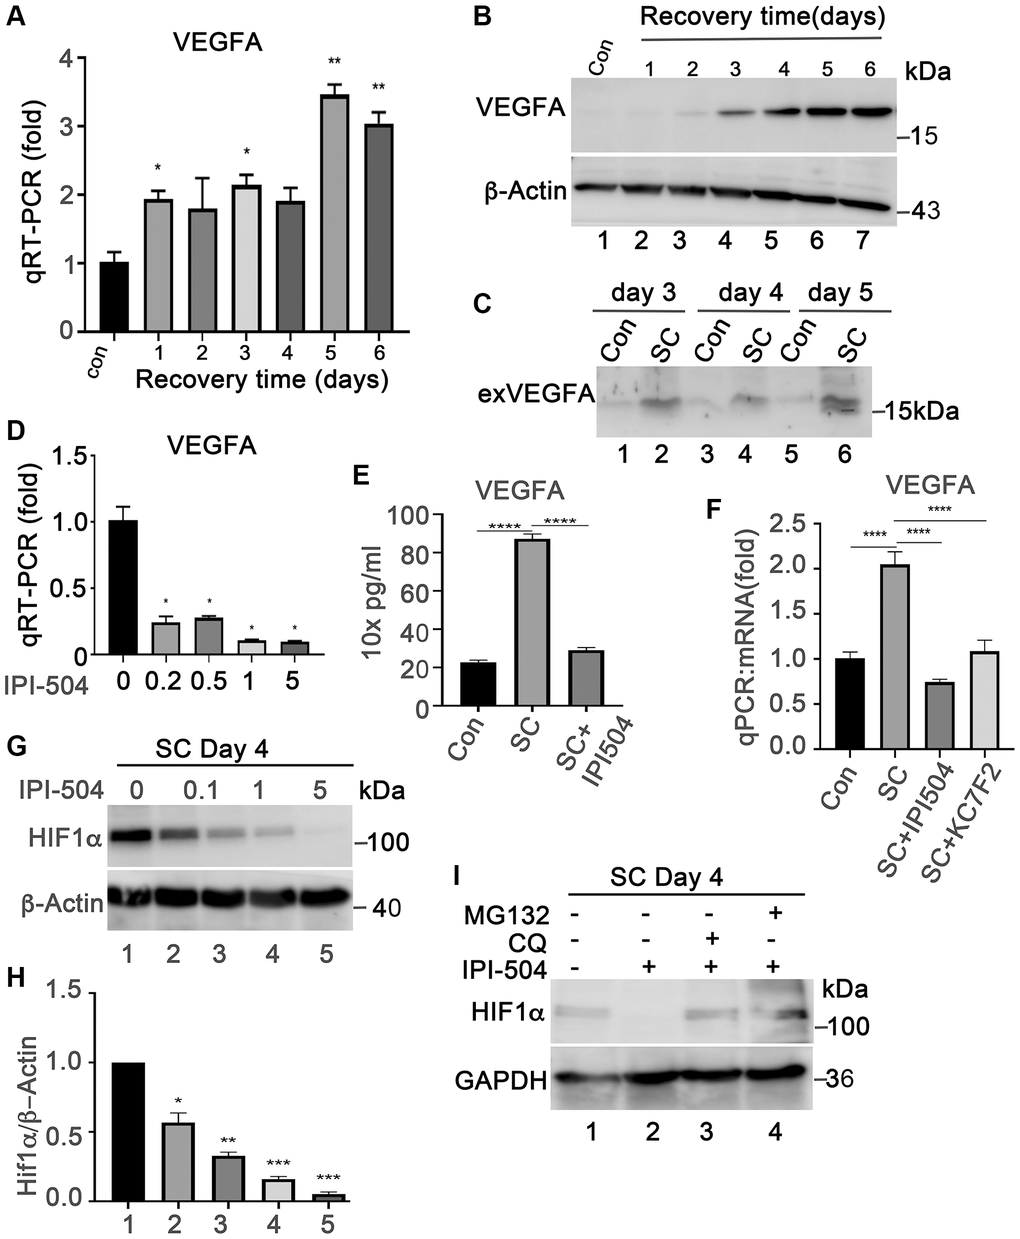 IPI-504 inhibits VEGFA expression by down-regulating HIF1α protein expression in senescent RPE cell in vitro. (A) Quantitative PCR determined VEGFA expression in control ARPE-19 cells (Con) or ARPE-19 cells treated with 2 h H2O2 followed by recovery in normal media for 0, 1, 2, 3, 4 and 5 days. (B) Immunoblot of VEGFA protein in the cells used in A. (C) Immunoblot of VEGFA in the supernatant of proliferative ARPE-19 cells (Con) or senescent ARPE-19 cells that were cultured for 3, 4 and 5 days. (D) Quantitative PCR determine VEGFA mRNA in day 4 senescent ARPE-19 cells treated with IPI-504 at 0.2, 0.5, 1 and 5 μM. (E) ELISA determines the VEGFA protein in the supernatants of day 4 senescent ARPE-19 cells treated with 1 μM IPI-504 for 24 hours. (F) Quantitative PCR determines VEGFA mRNA expression in day 4 senescent ARPE cells treated with HIF1α inhibitor KC7F2 or HSP90 inhibitor IPI-504. The data in each quantitation figure were collected from three independent experiments, the two-tailed unpaired t-test was used for statistical analysis, *P ***p G) Immunoblot of HIF10α protein in day-4 senescent ARPE-19 cells treated with IPI-504 at 0, 0.1, 1 and 5 μM. β-actin was used for protein loading control. (H) Densitometry quantitation of HIF1α vs. β-actin in G, the data shown are mean ± SD. The two-tail unpaired t-test was used for statistical analysis (n = 3). *P ***P I) Immunoblot HIF1α and GAPDH proteins in senescent ARPE-19 cells treated in media containing PBS (sham, lane 1), IPI-504 alone (lane 2), IPI-504 +chloroquine (lane 3) and IPI-504 + MG132 (lane 4).